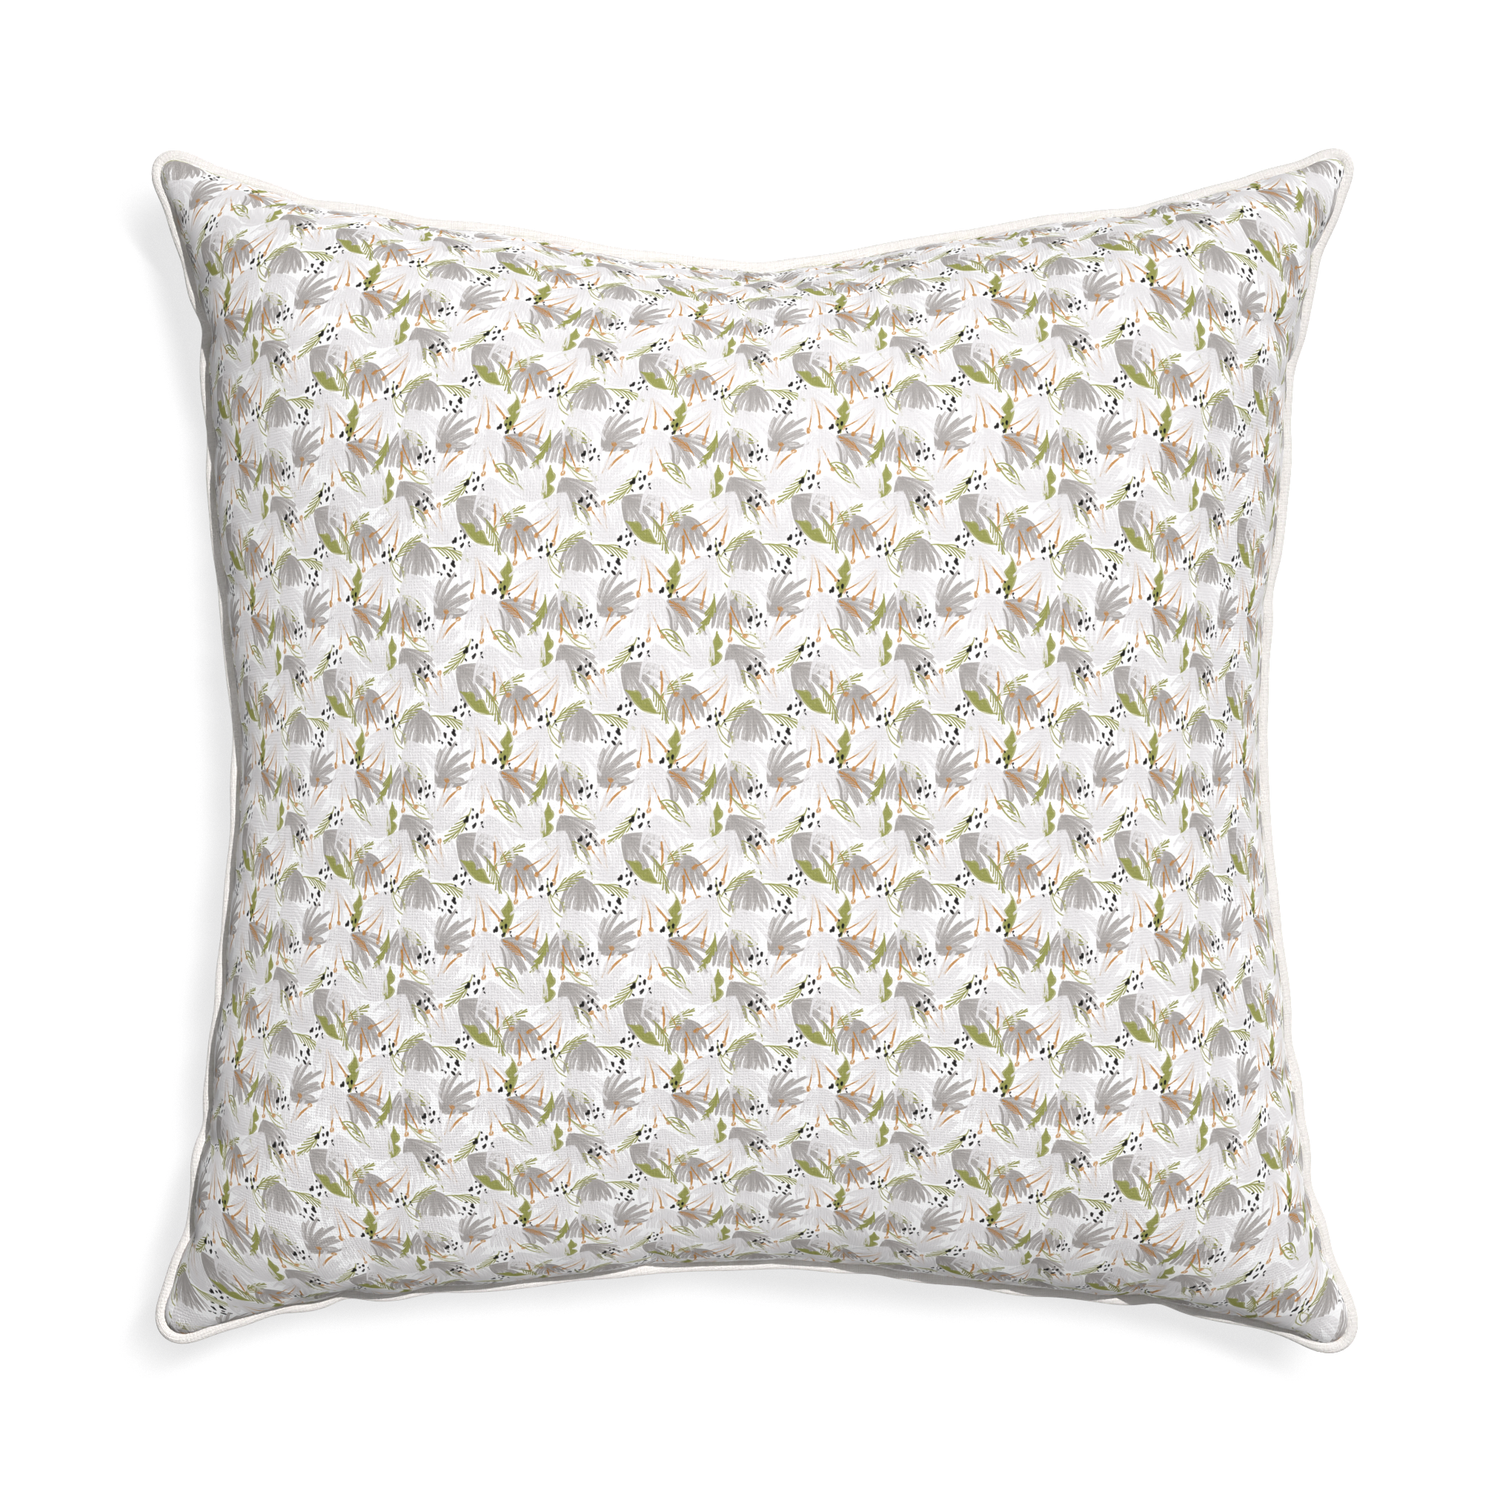 Euro-sham eden grey custom pillow with snow piping on white background